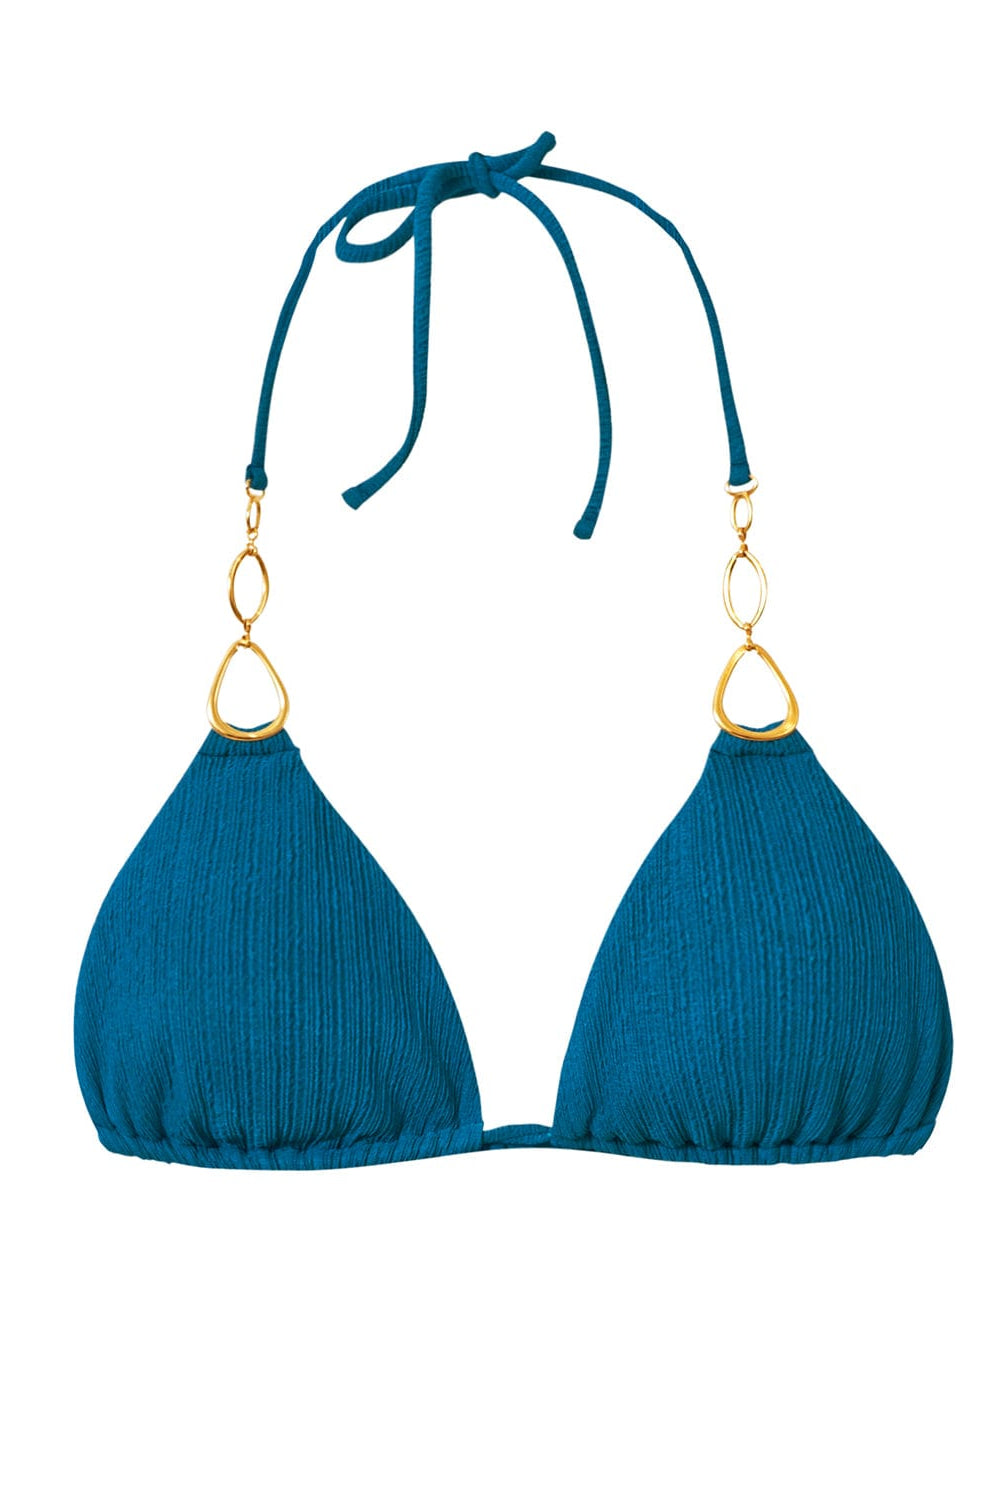 A textured turquoise triangle shape bikini top with gold details. Featured against a white wall background.